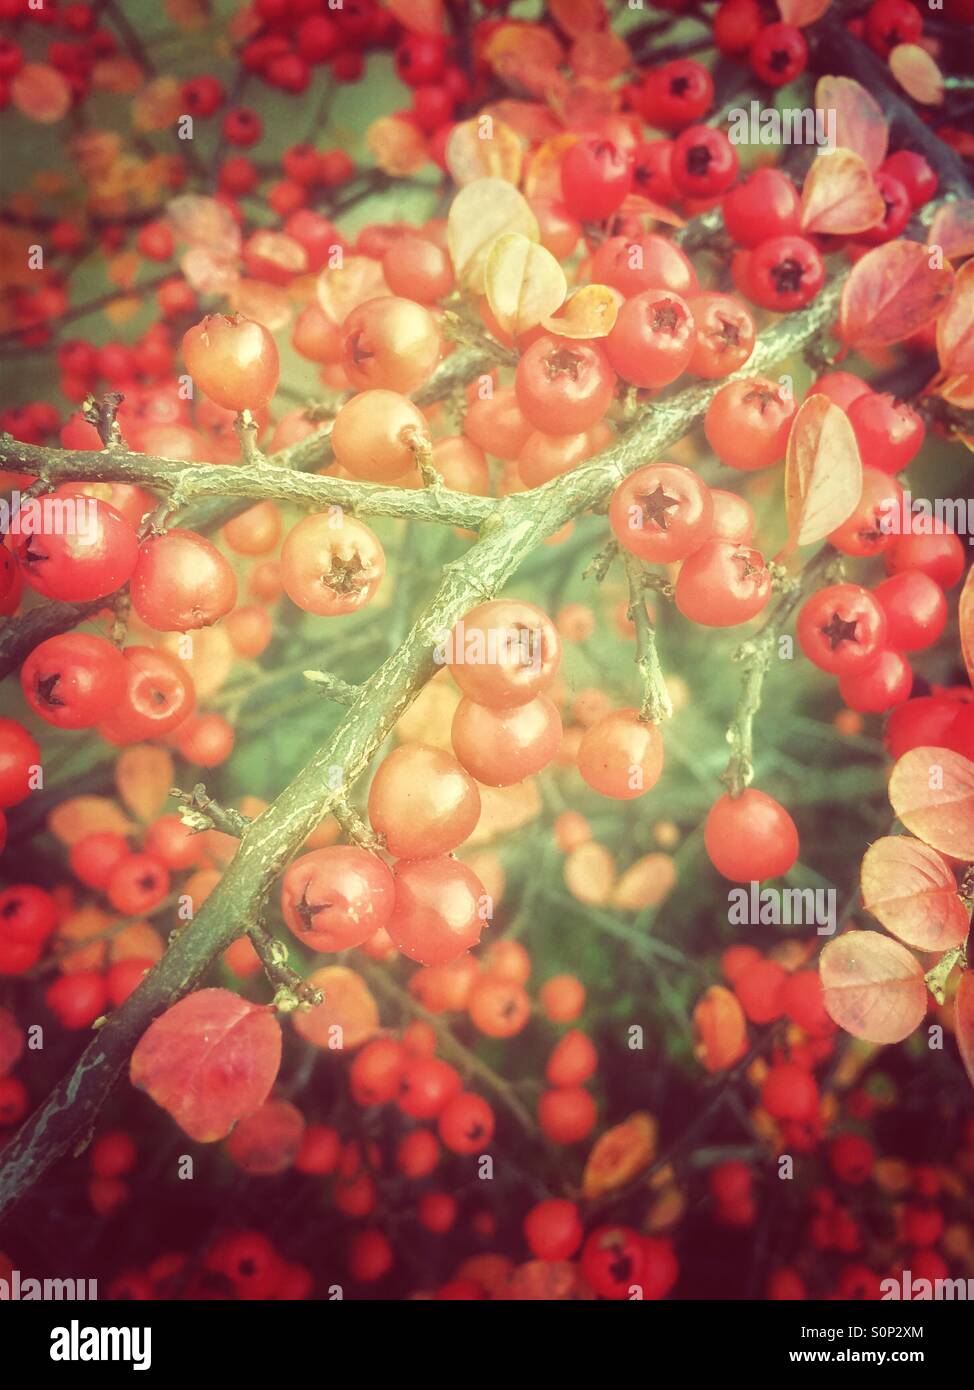 Bright red winter berries on Cotoneaster shrub. Stock Photo